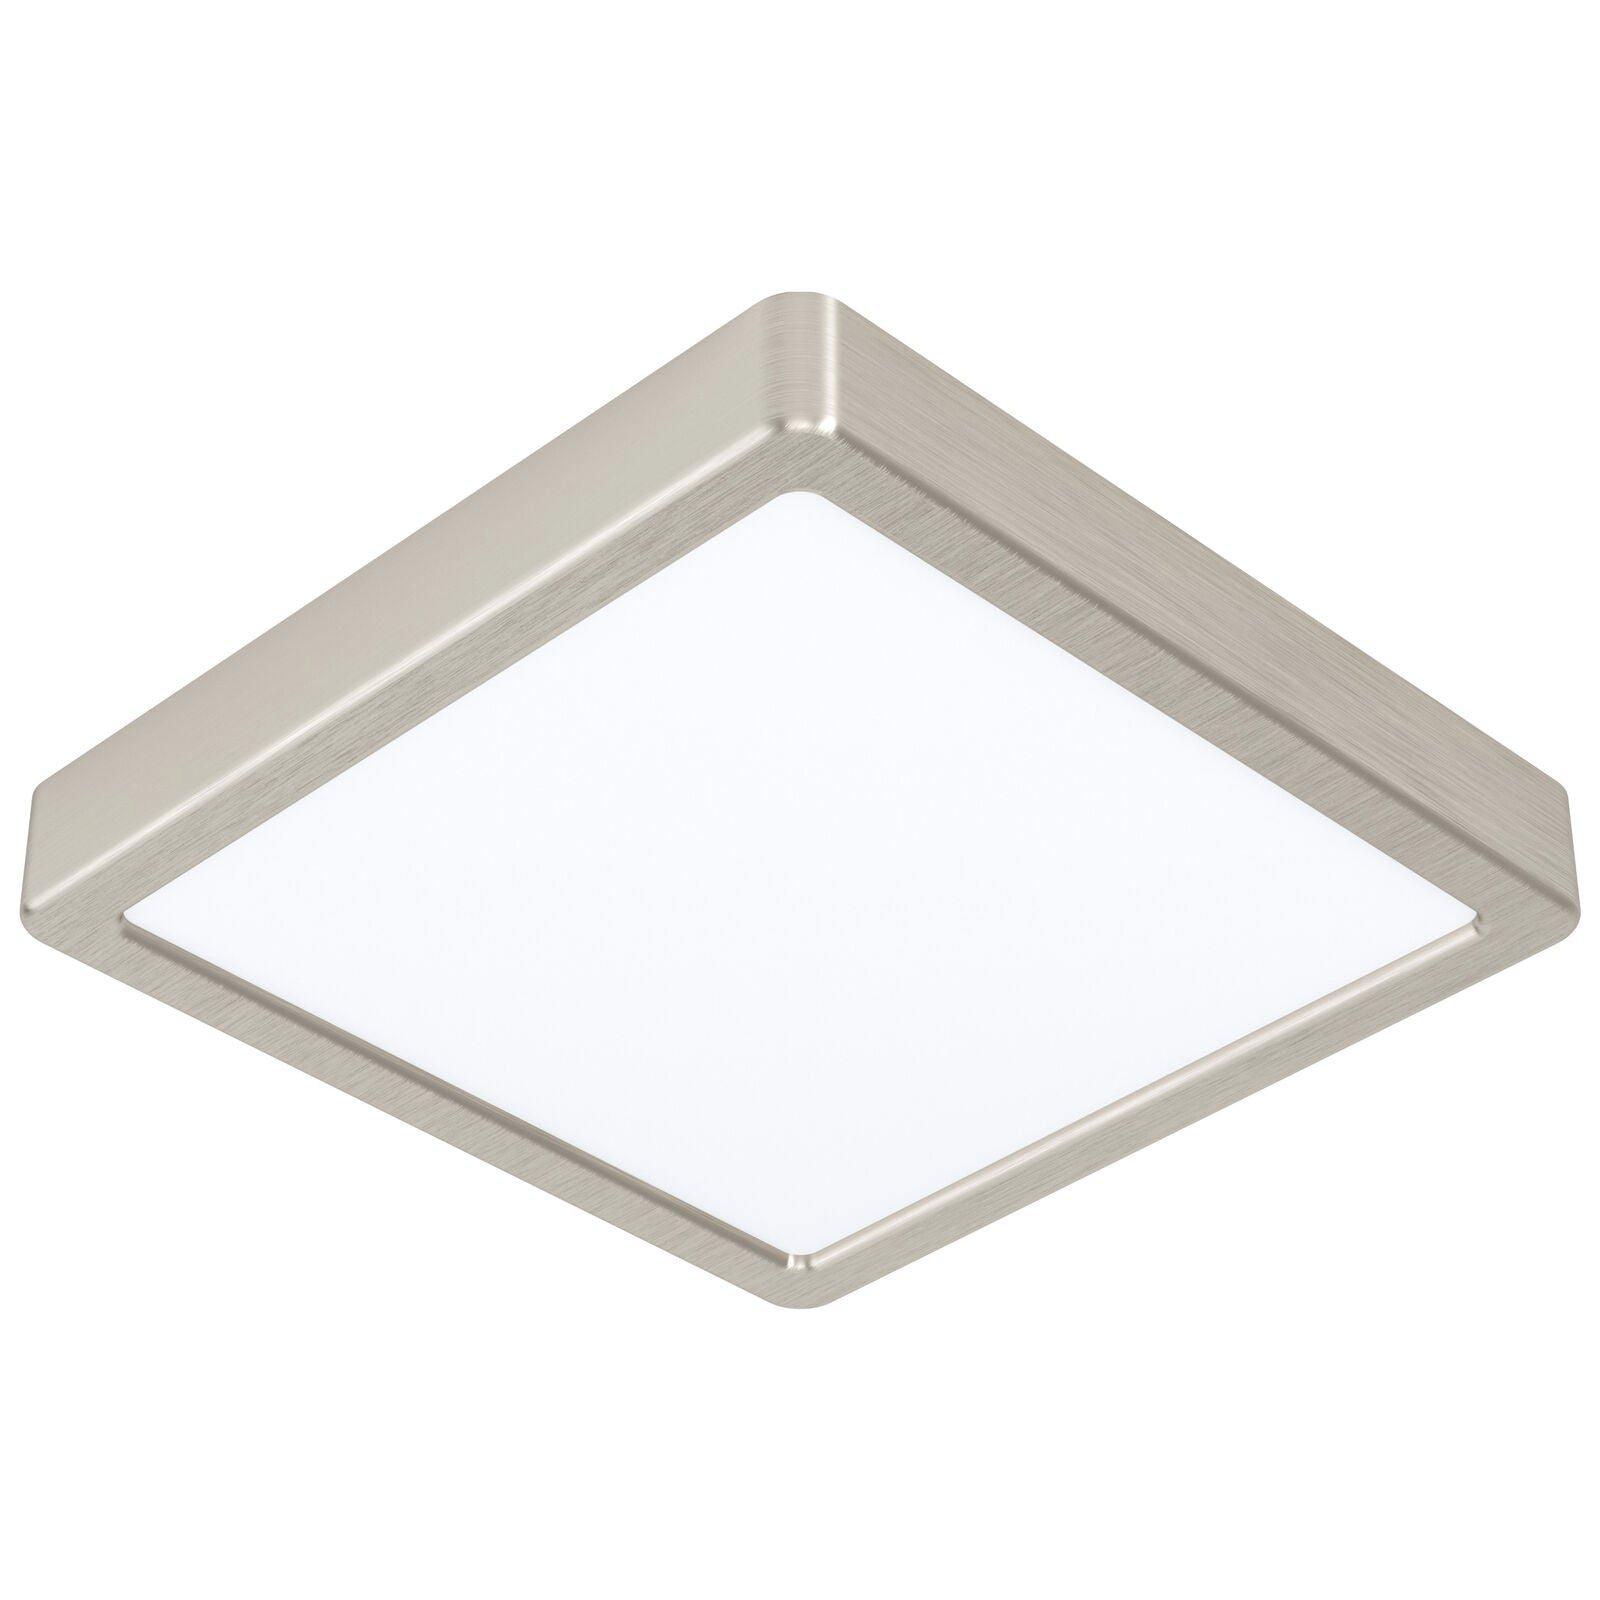 Wall / Ceiling Light Satin Nickel 210mm Square Surface Mounted 16.5W LED 3000K